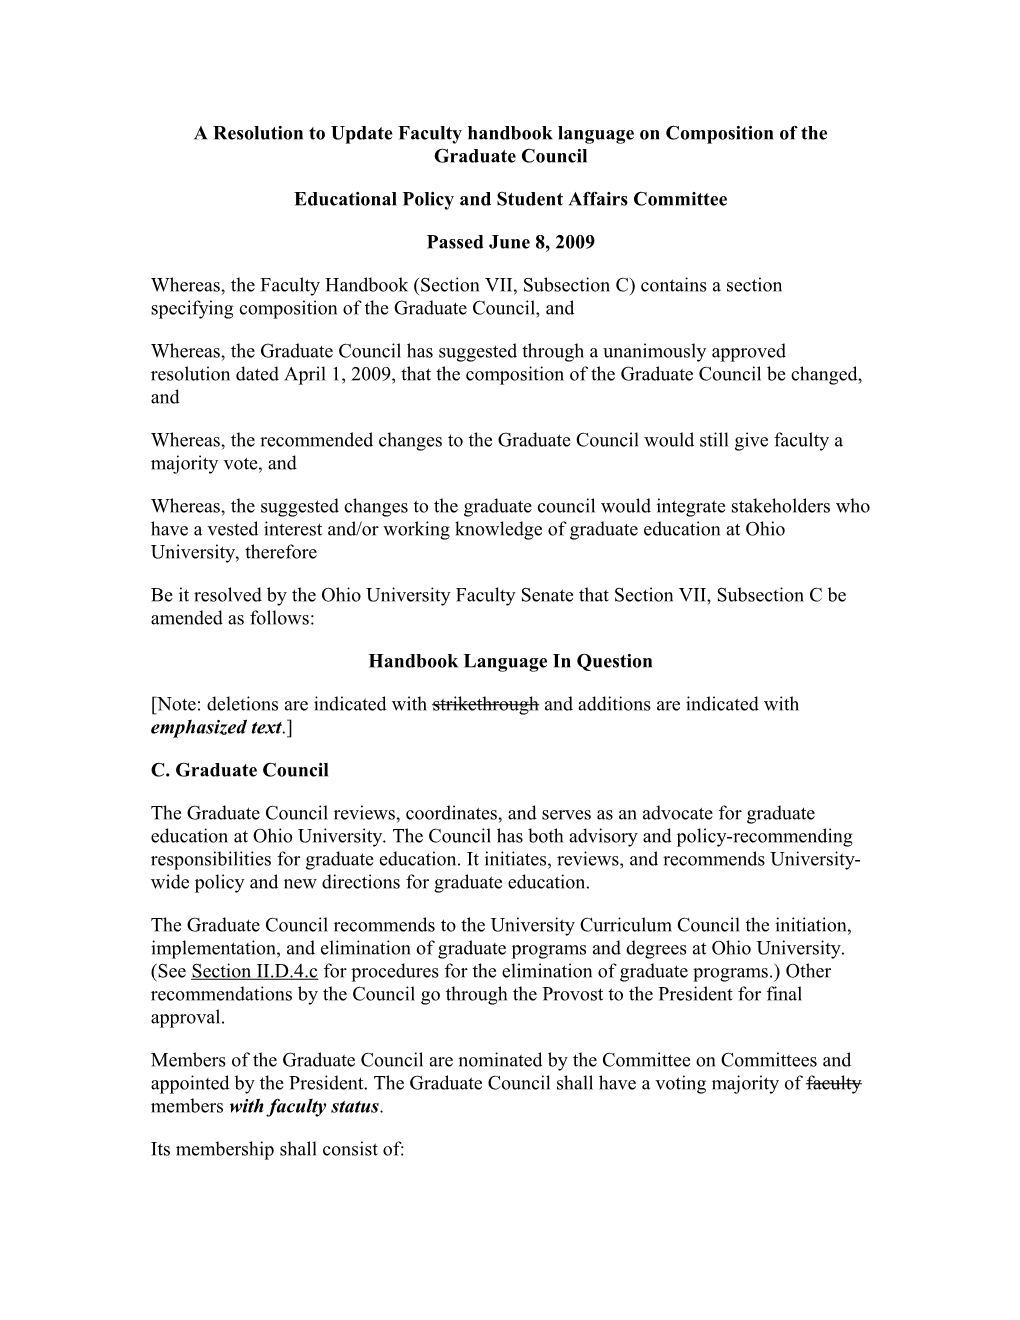 A Resolution to Update Faculty Handbook Language on Composition of the Graduate Council